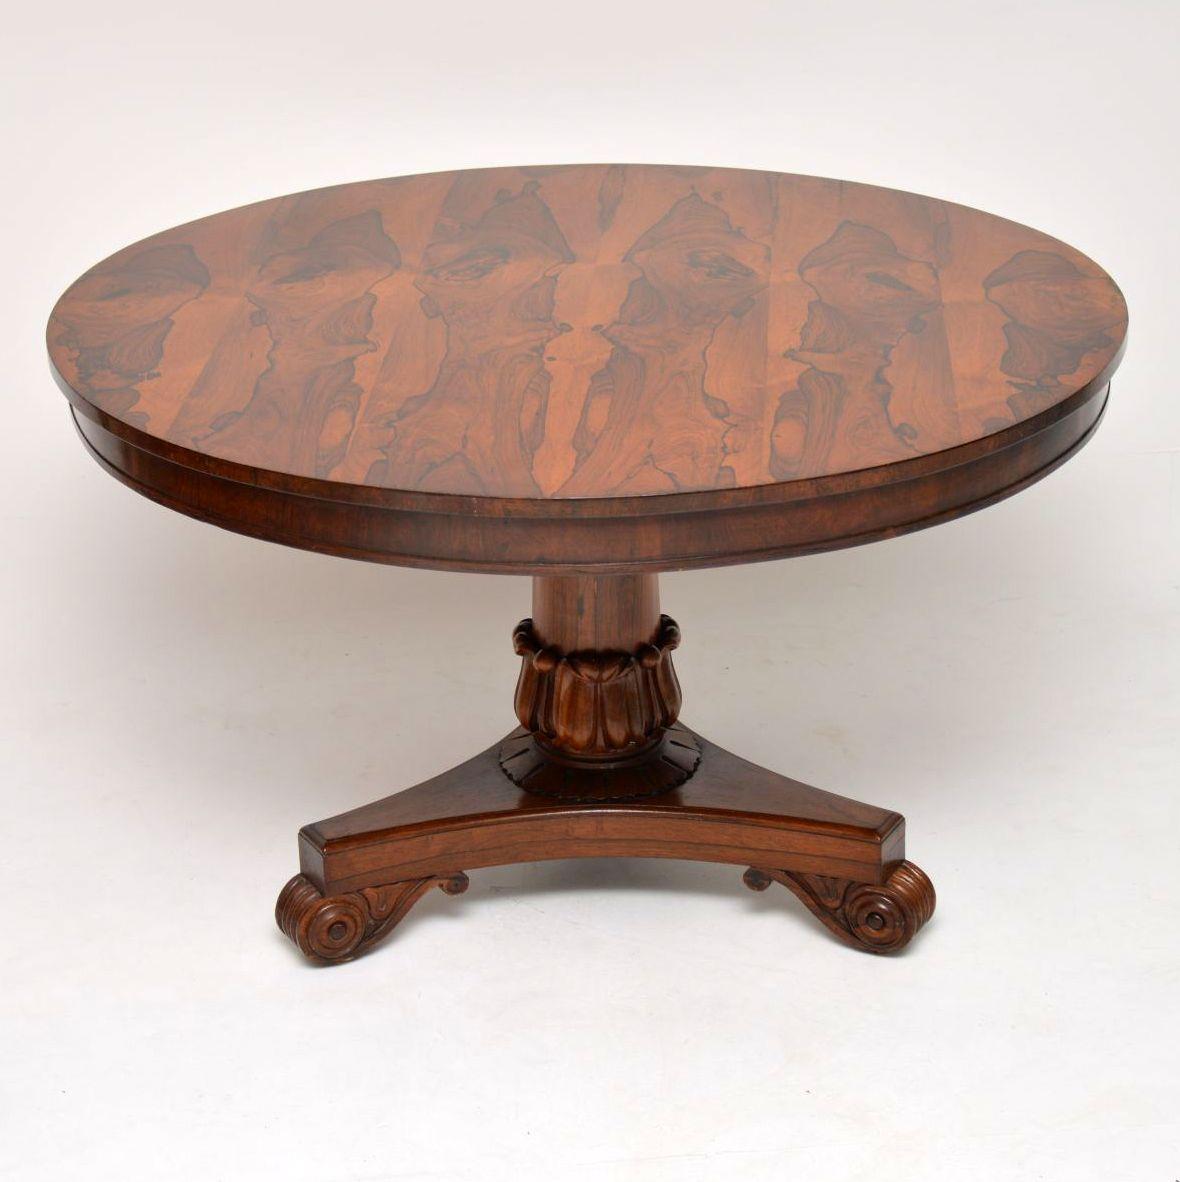 This antique William IV rosewood dining table has to be one of the nicest ones I've come across. It's all original, extremely fine quality and in excellent condition. The pattern of the rosewood veneers on the top are stunning and very unusual. The